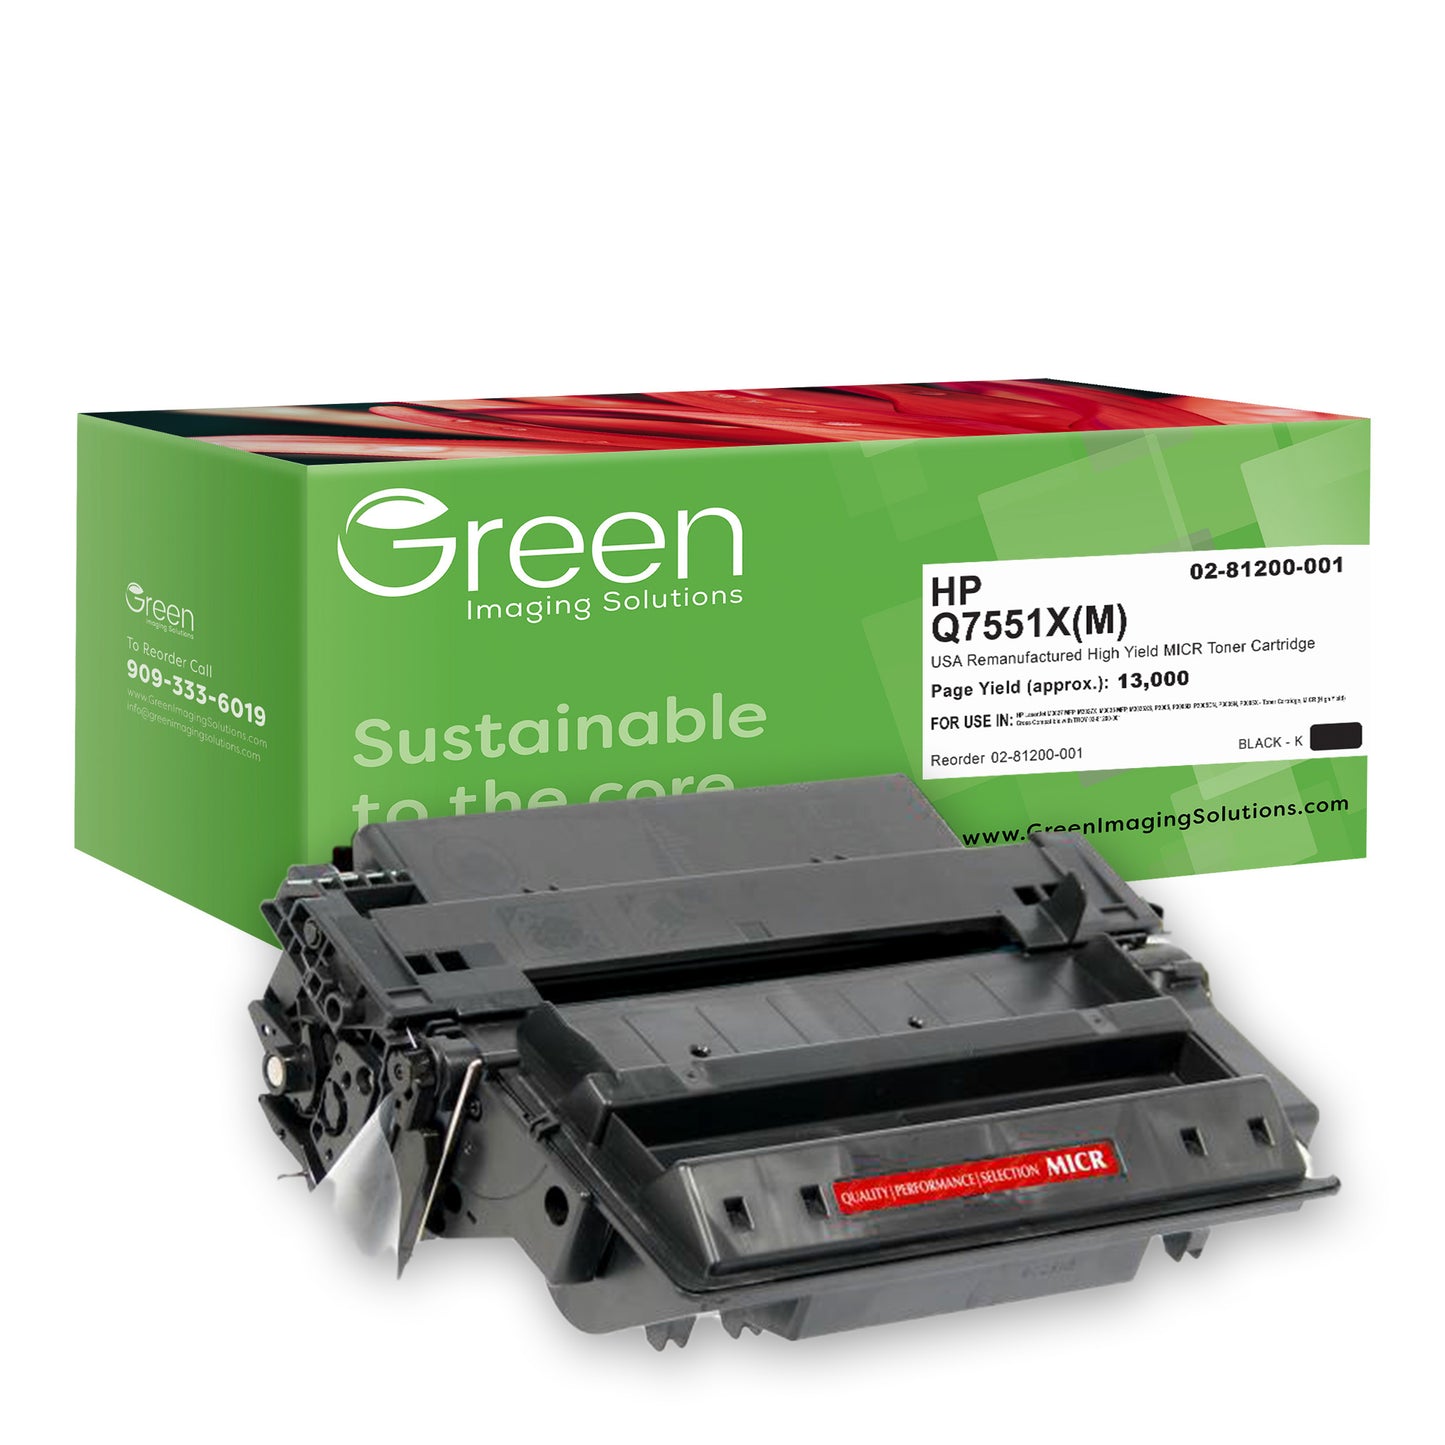 GIS USA Remanufactured High Yield MICR Toner Cartridge for HP Q7551X, TROY 02-81200-001